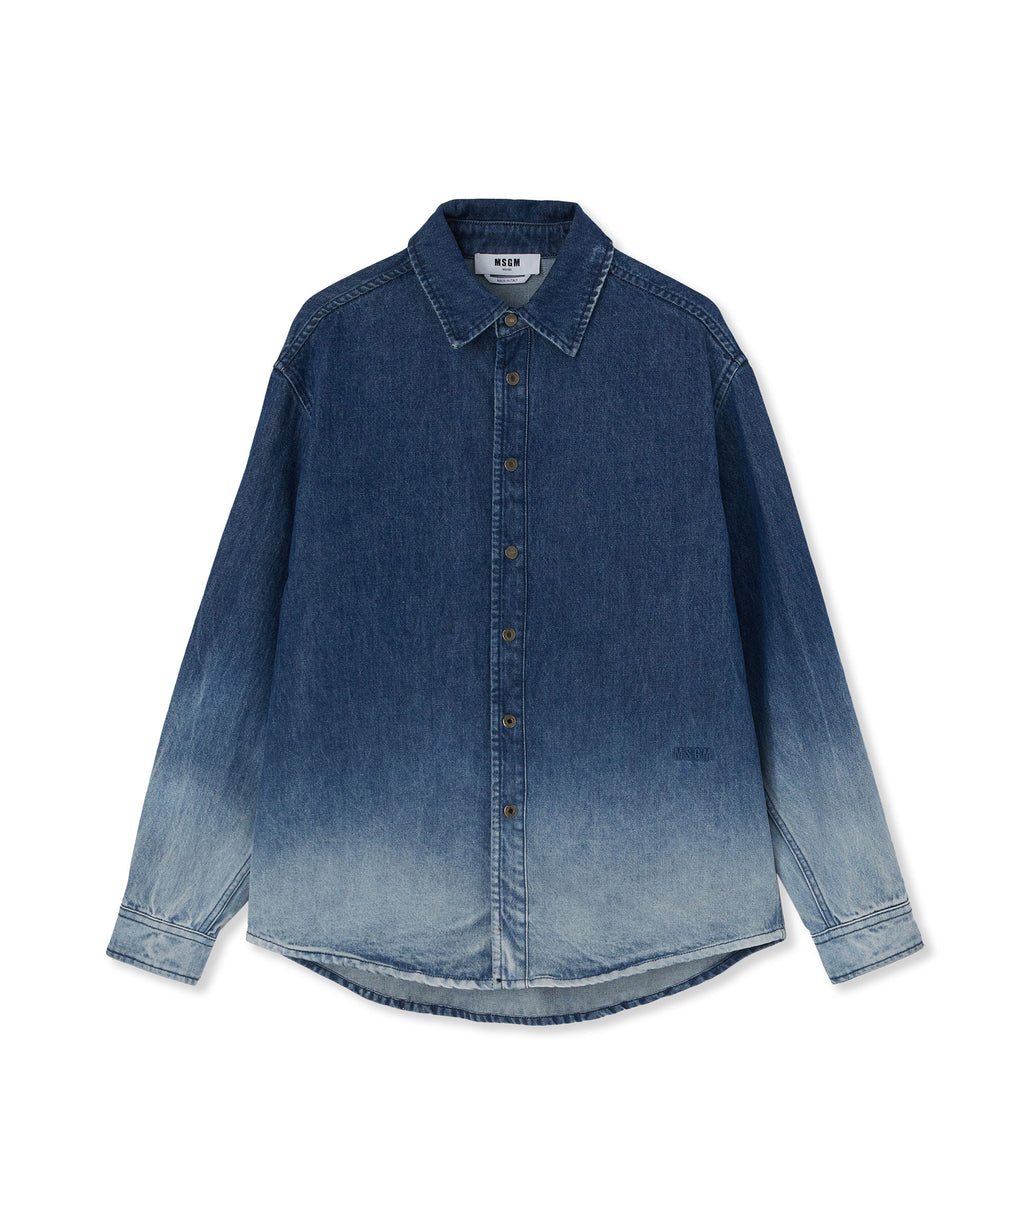 Blue denim shirt with faded treatment - MSGM Official